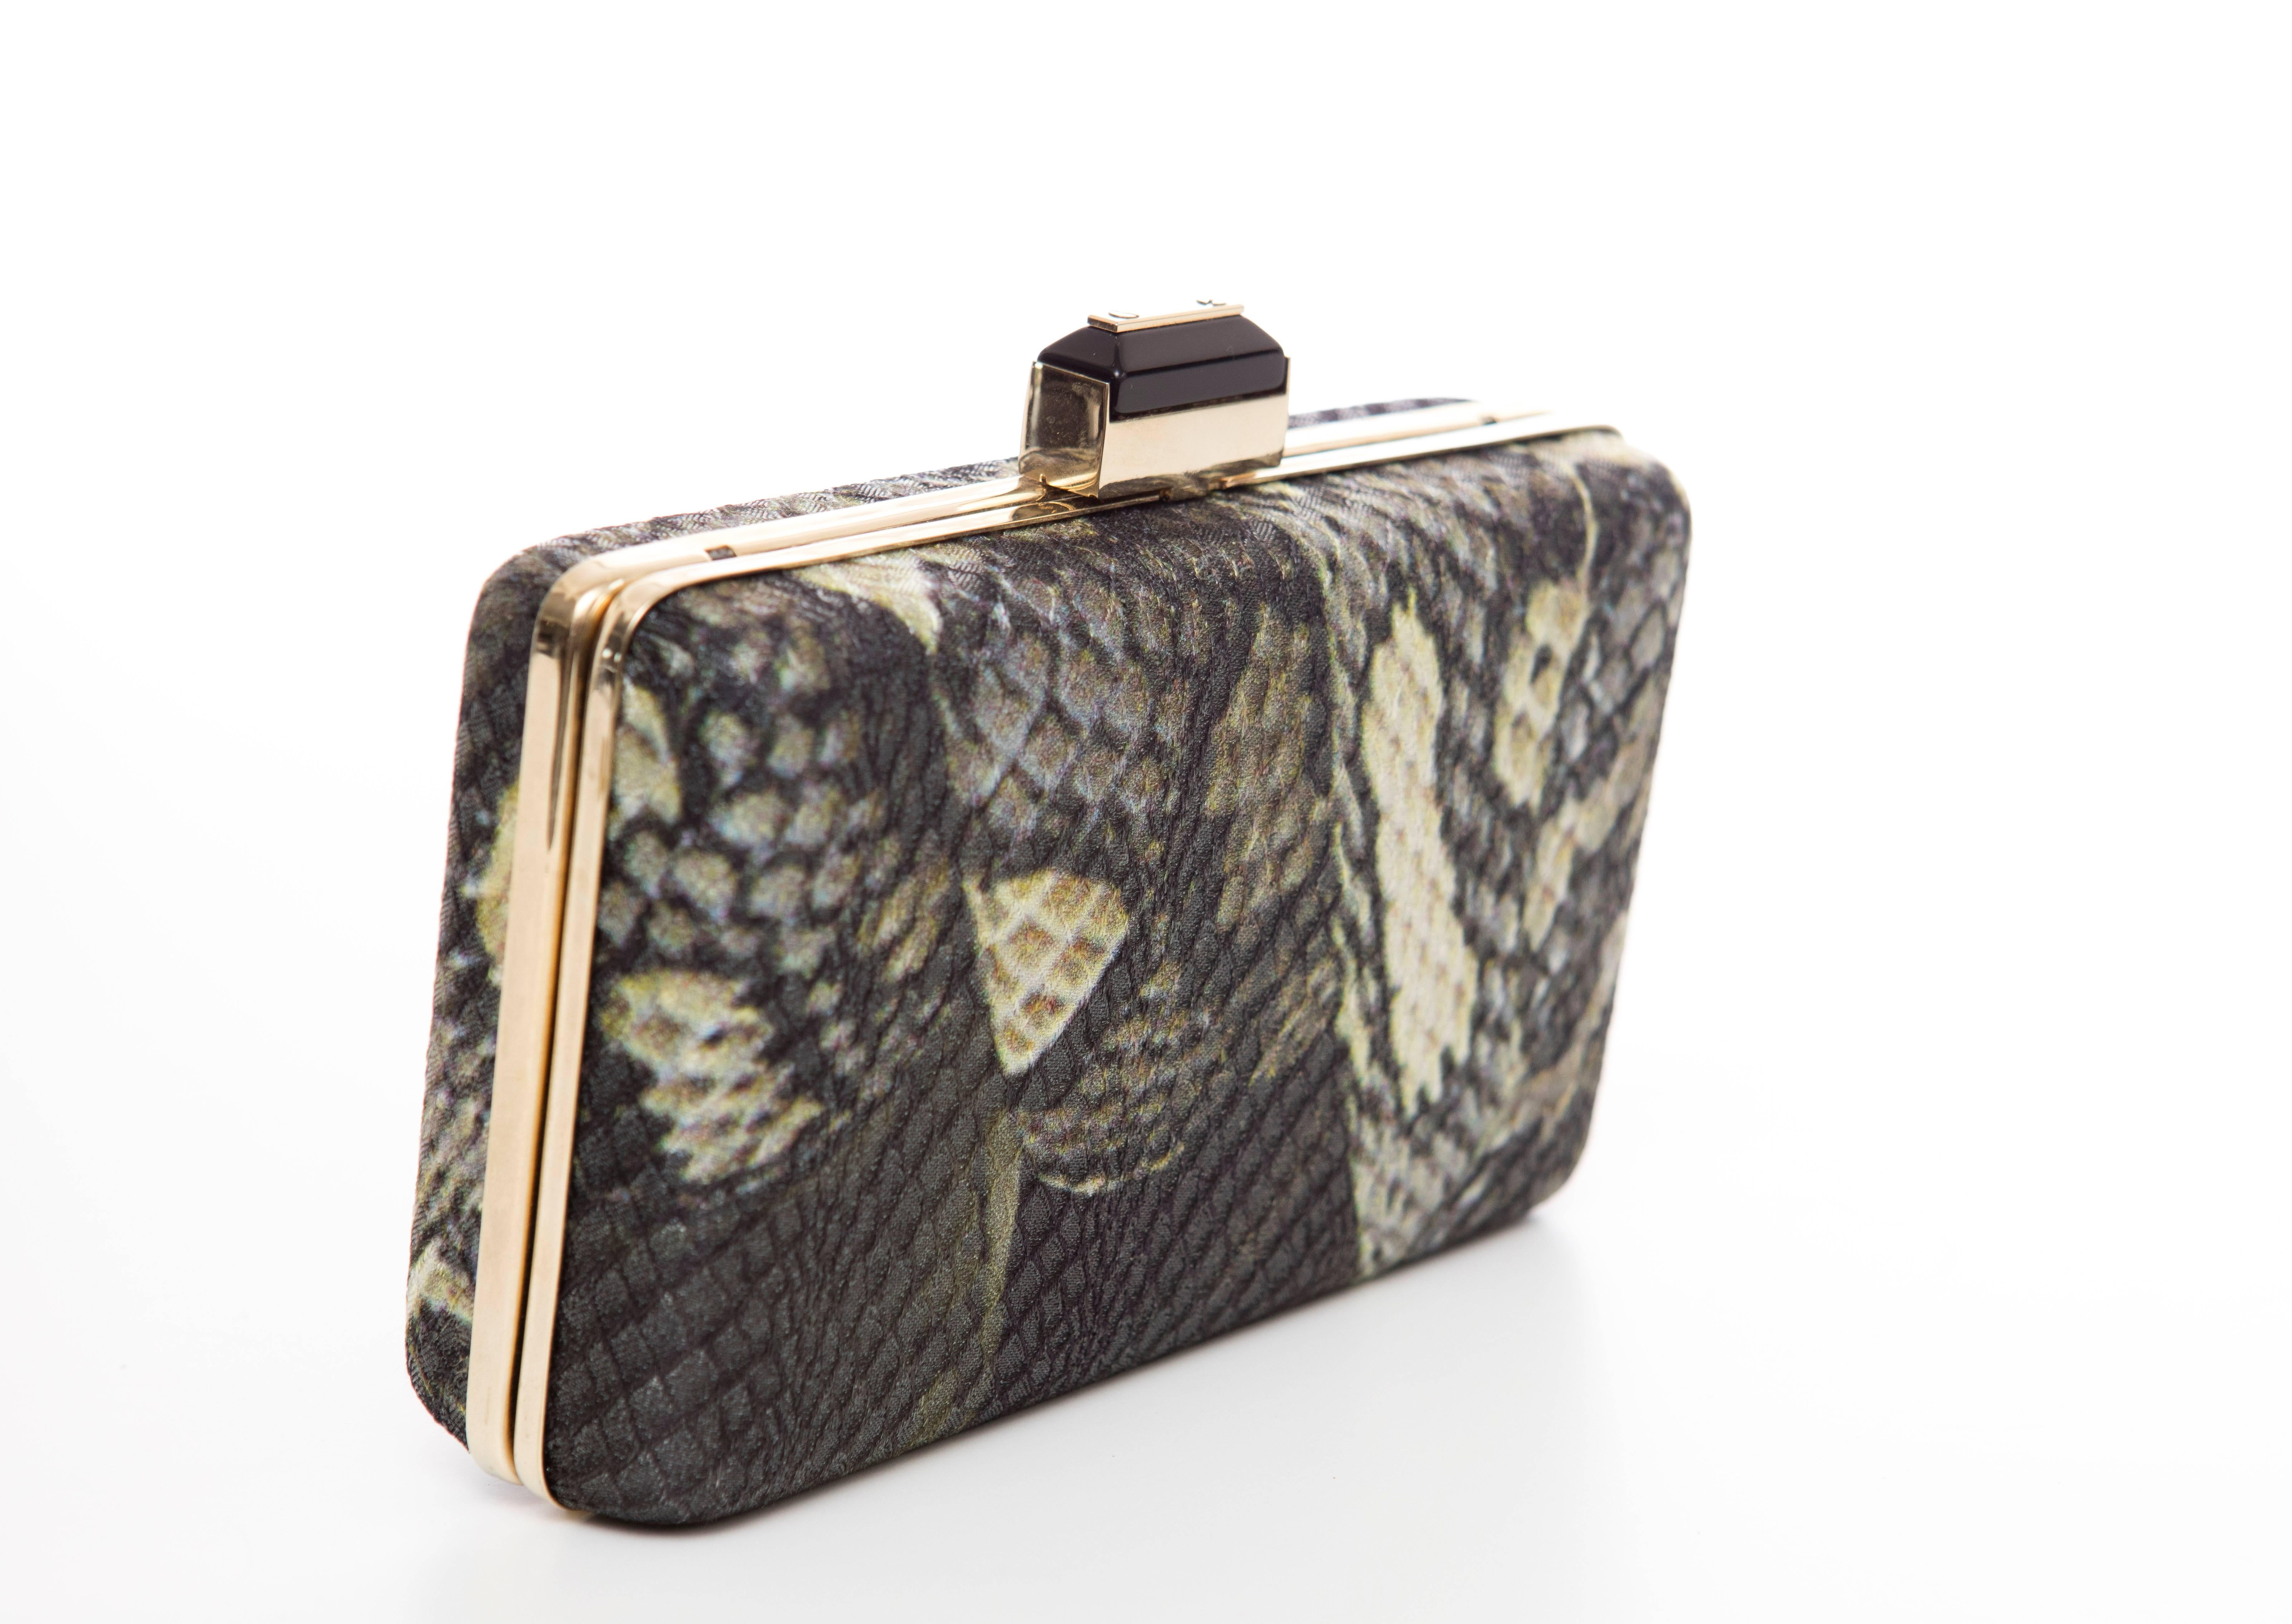 Alber Elbaz for Lanvin, Spring-Summer 2012, python print minaudière clutch with gold-tone hardware, single drop-in shoulder strap, black satin lining and jeweled push-lock closure at top. 

Height 4”, Width 6”, Depth 2”